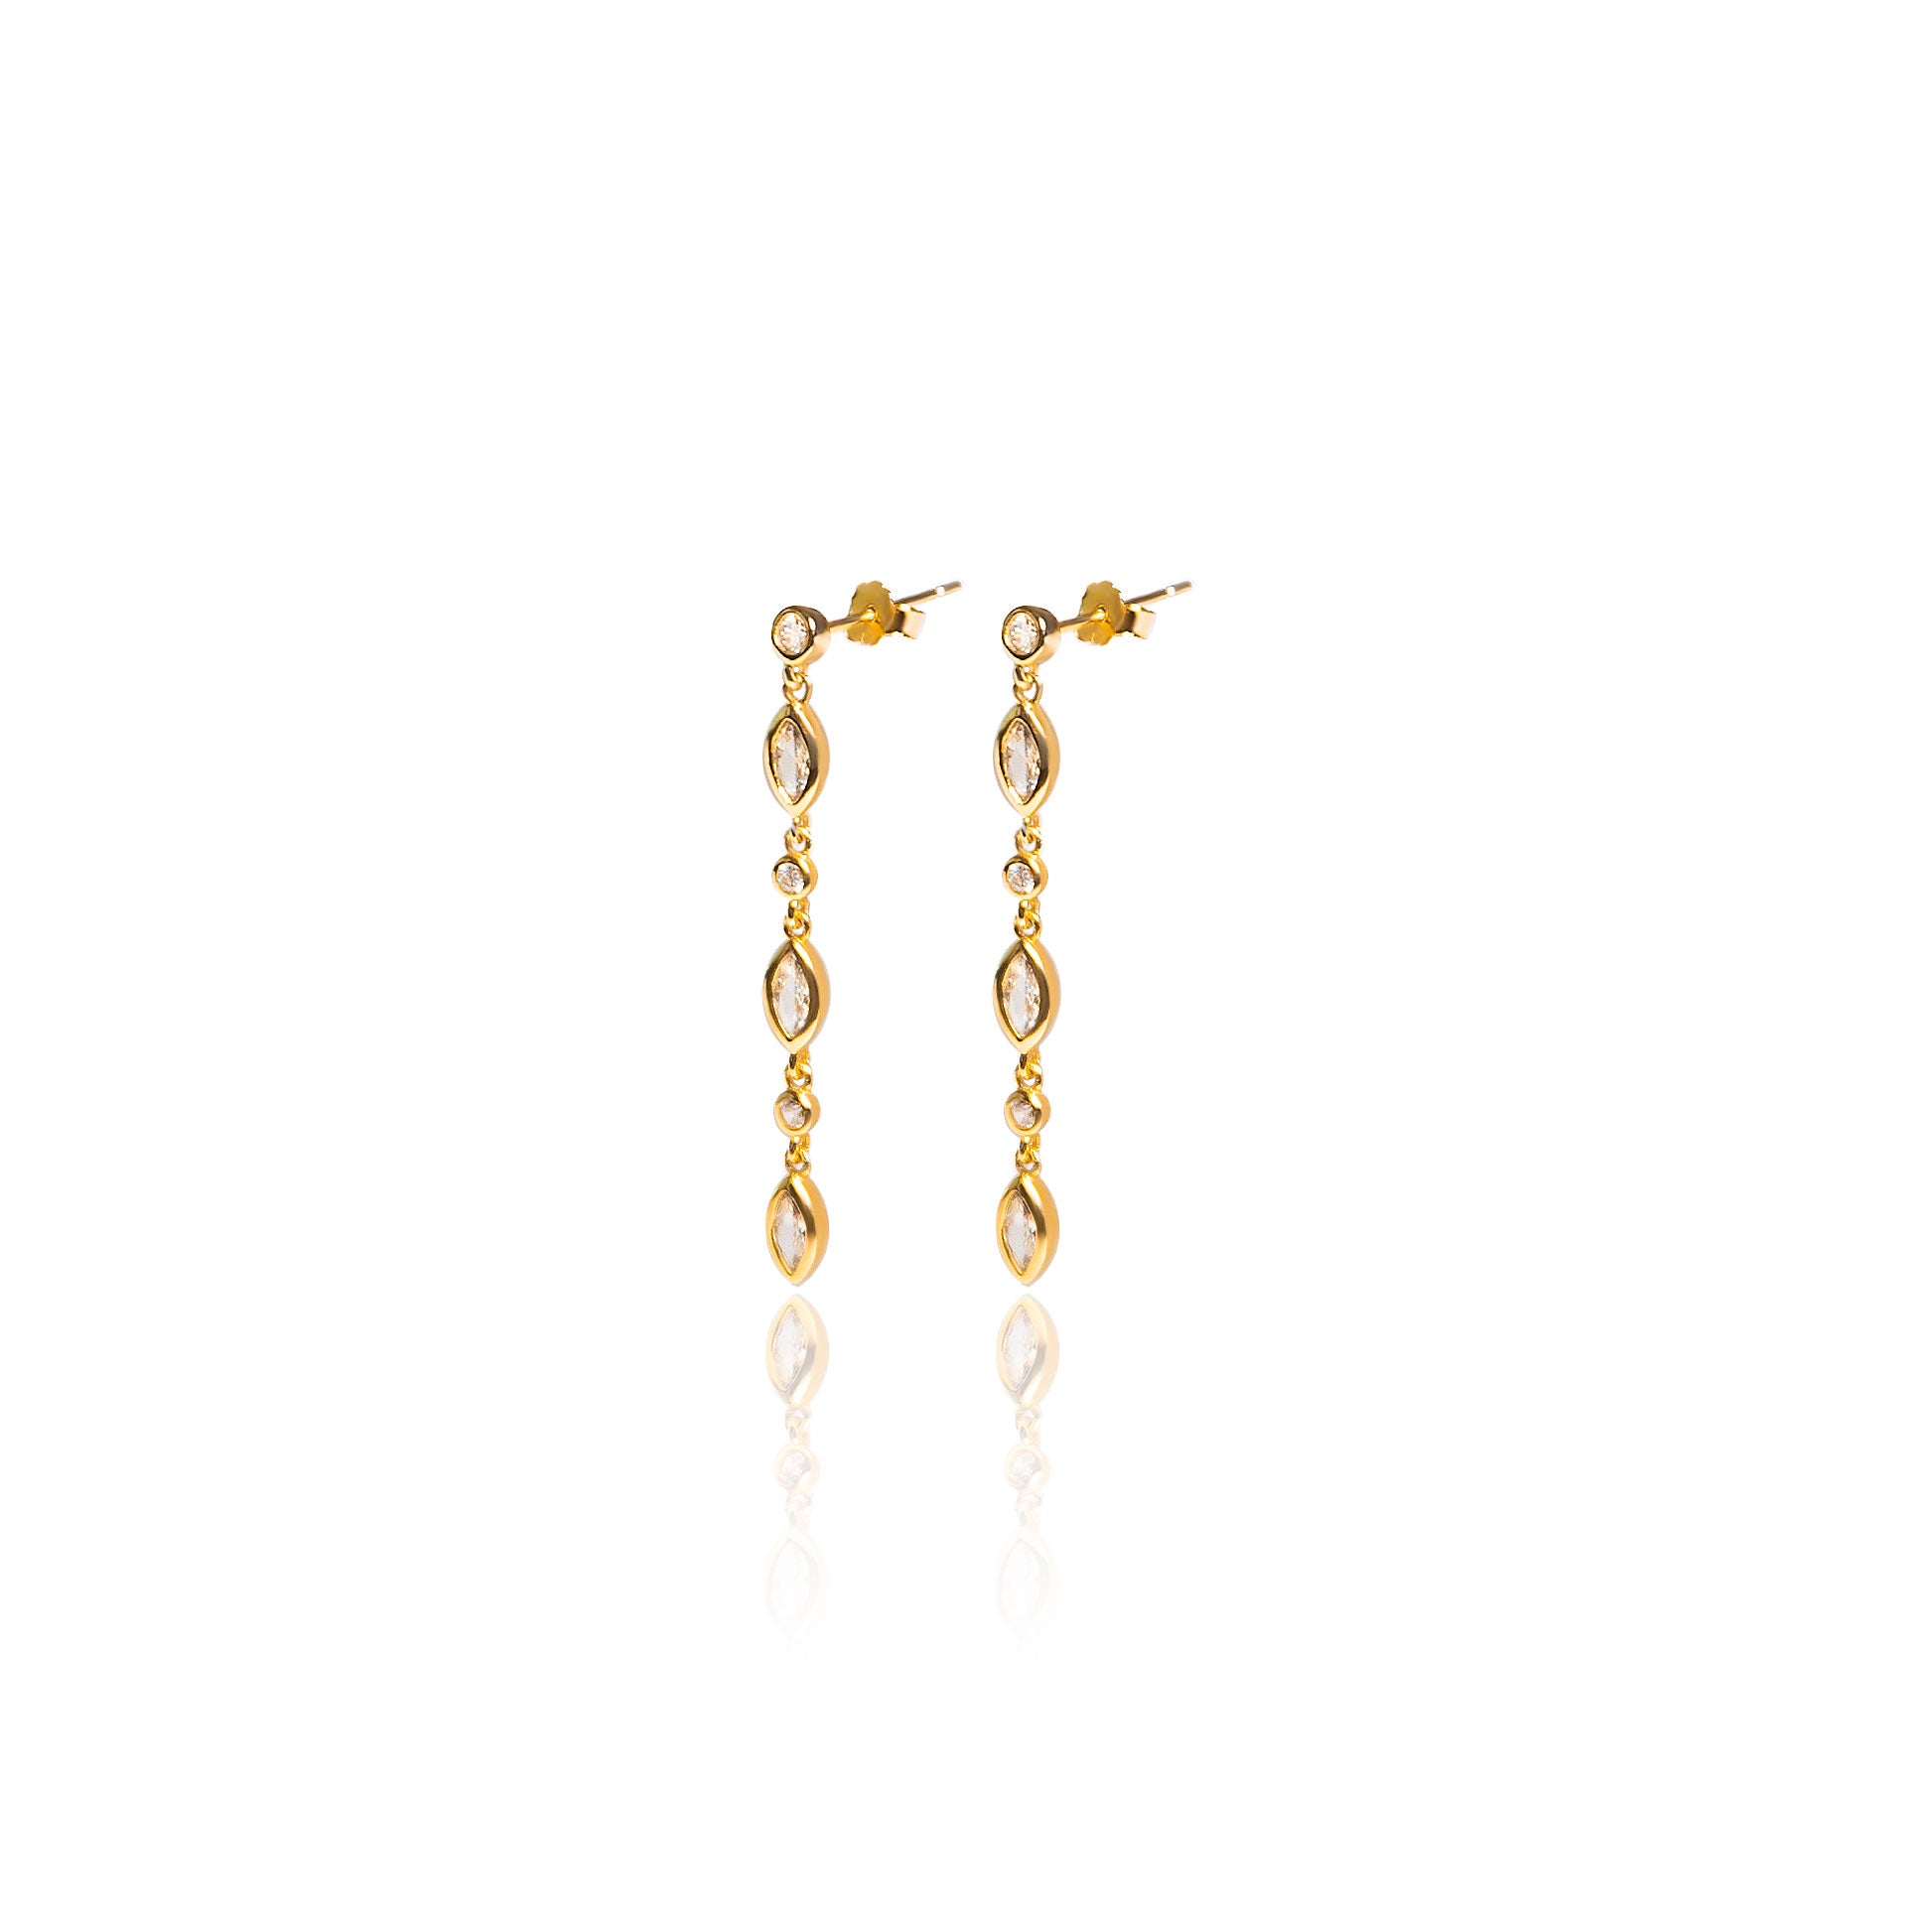 Looking for the perfect, glam and chic dangly earrings? Look no further. Featuring sparkly cubic zirconia (CZ) stones, our GINGER EARRINGS are light, don't weigh down your ears and instantly dress up any outfit.  18k gold plated on 925 sterling silver Length: 39mm All the earrings come in a beautiful jewelry pouch.